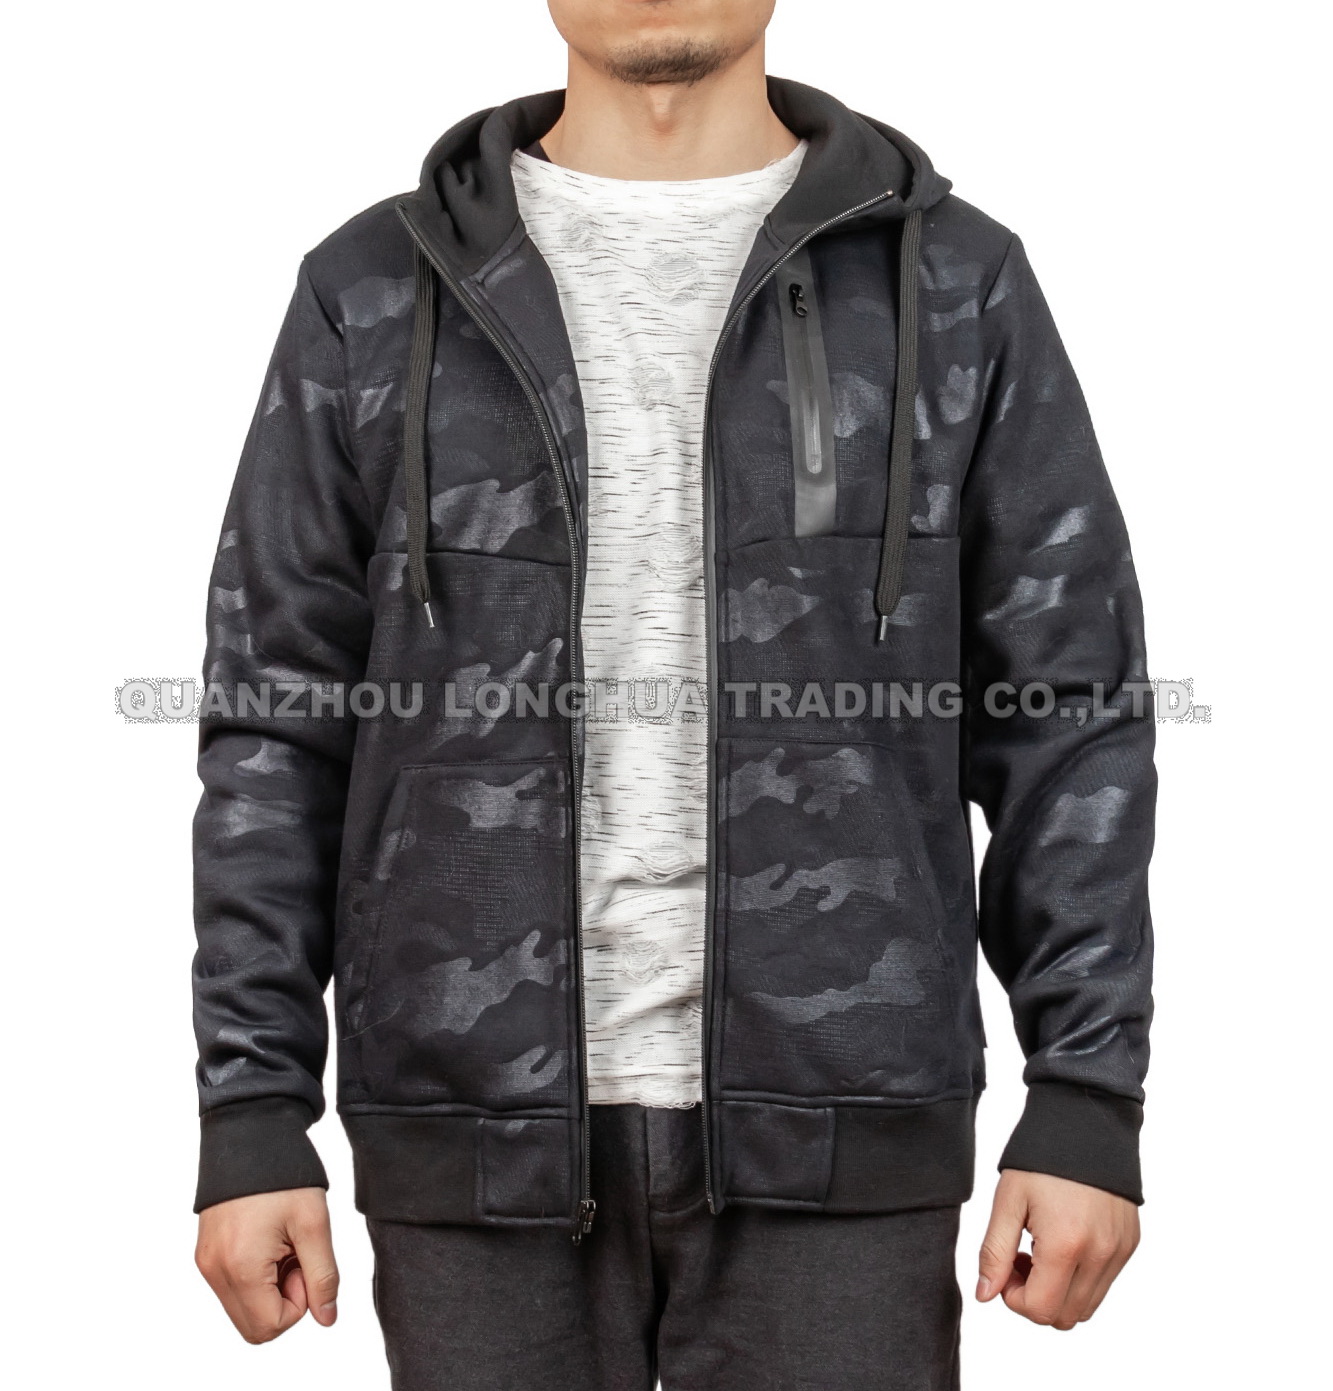 How to Care for a customized Sherpa lining coat 